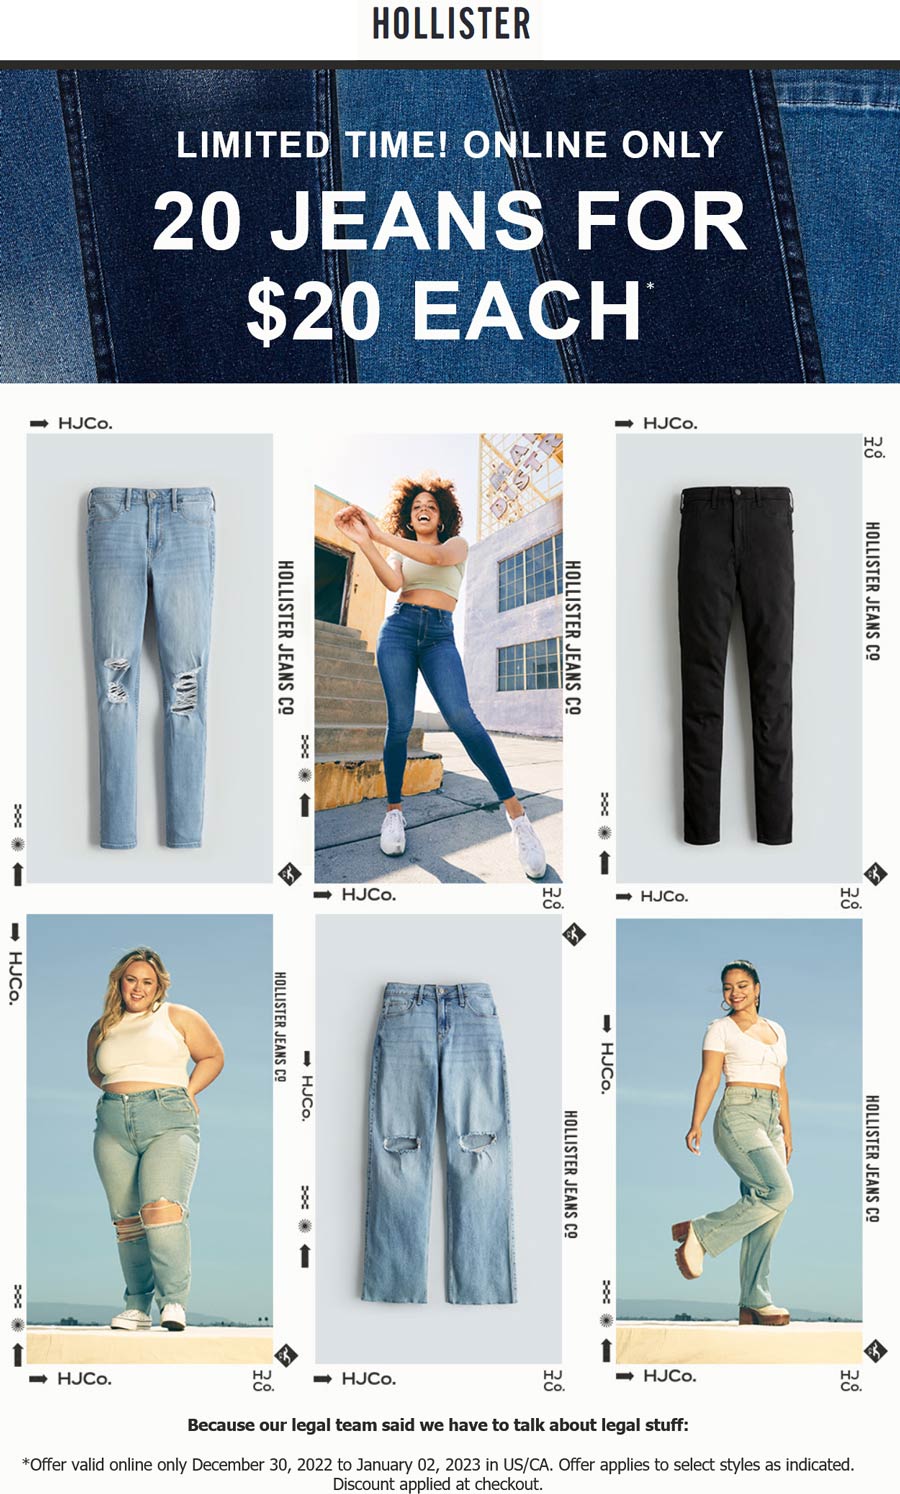 Hollister stores Coupon  20 jeans for $20 each online at Hollister #hollister 